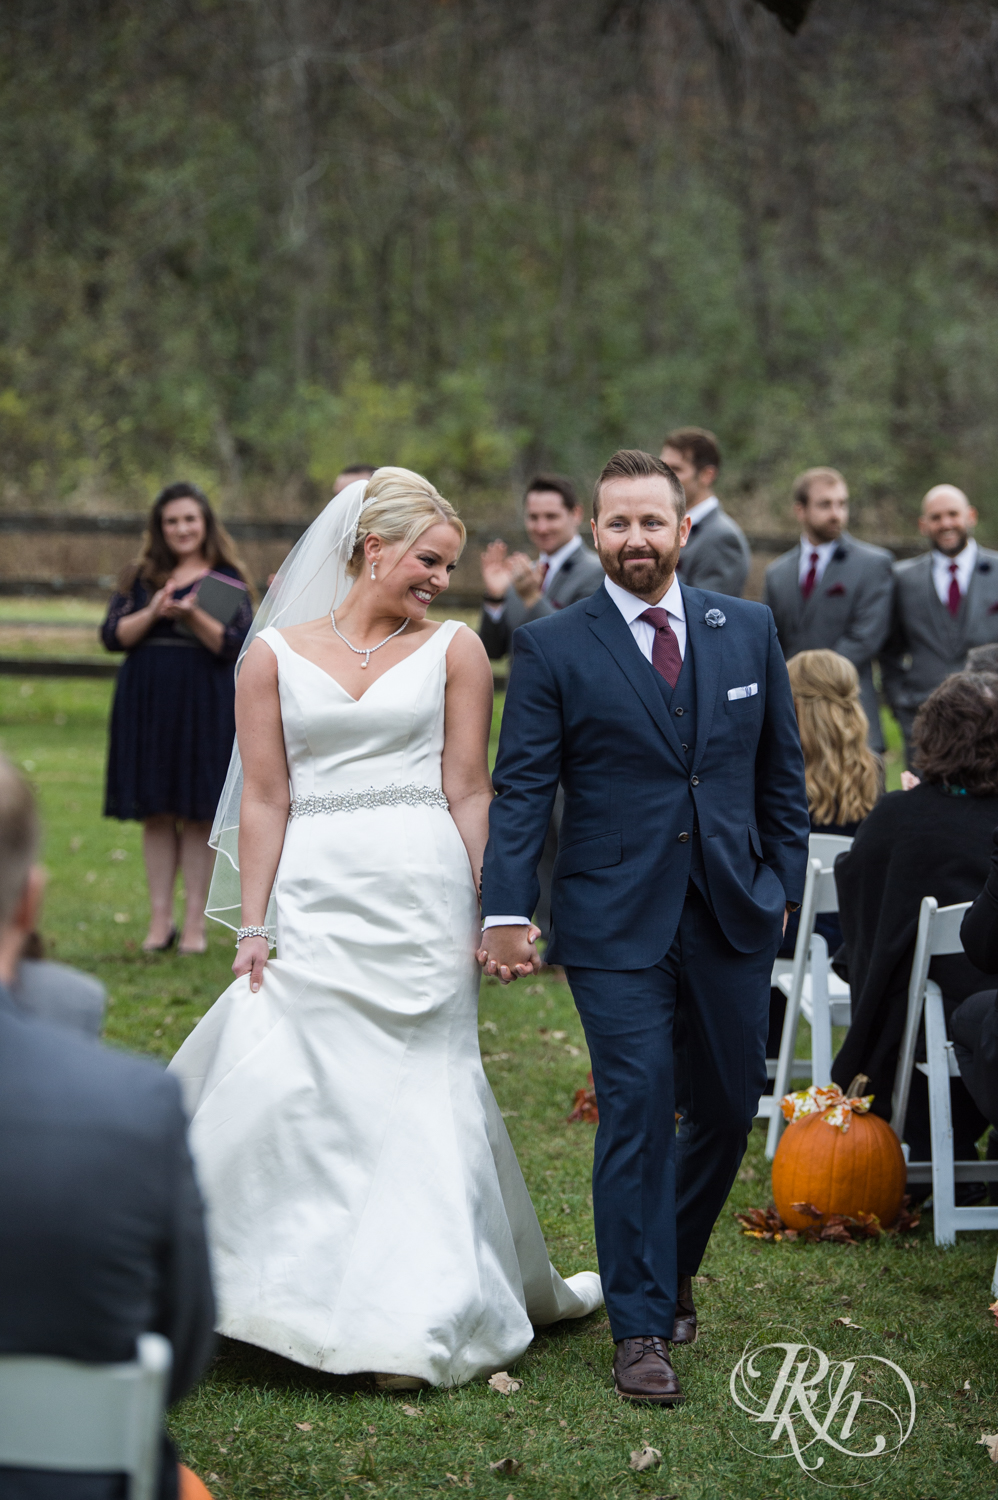 Bride and groom smile after outdoor wedding ceremony at Mayowood Stone Barn in Rochester, Minnesota.